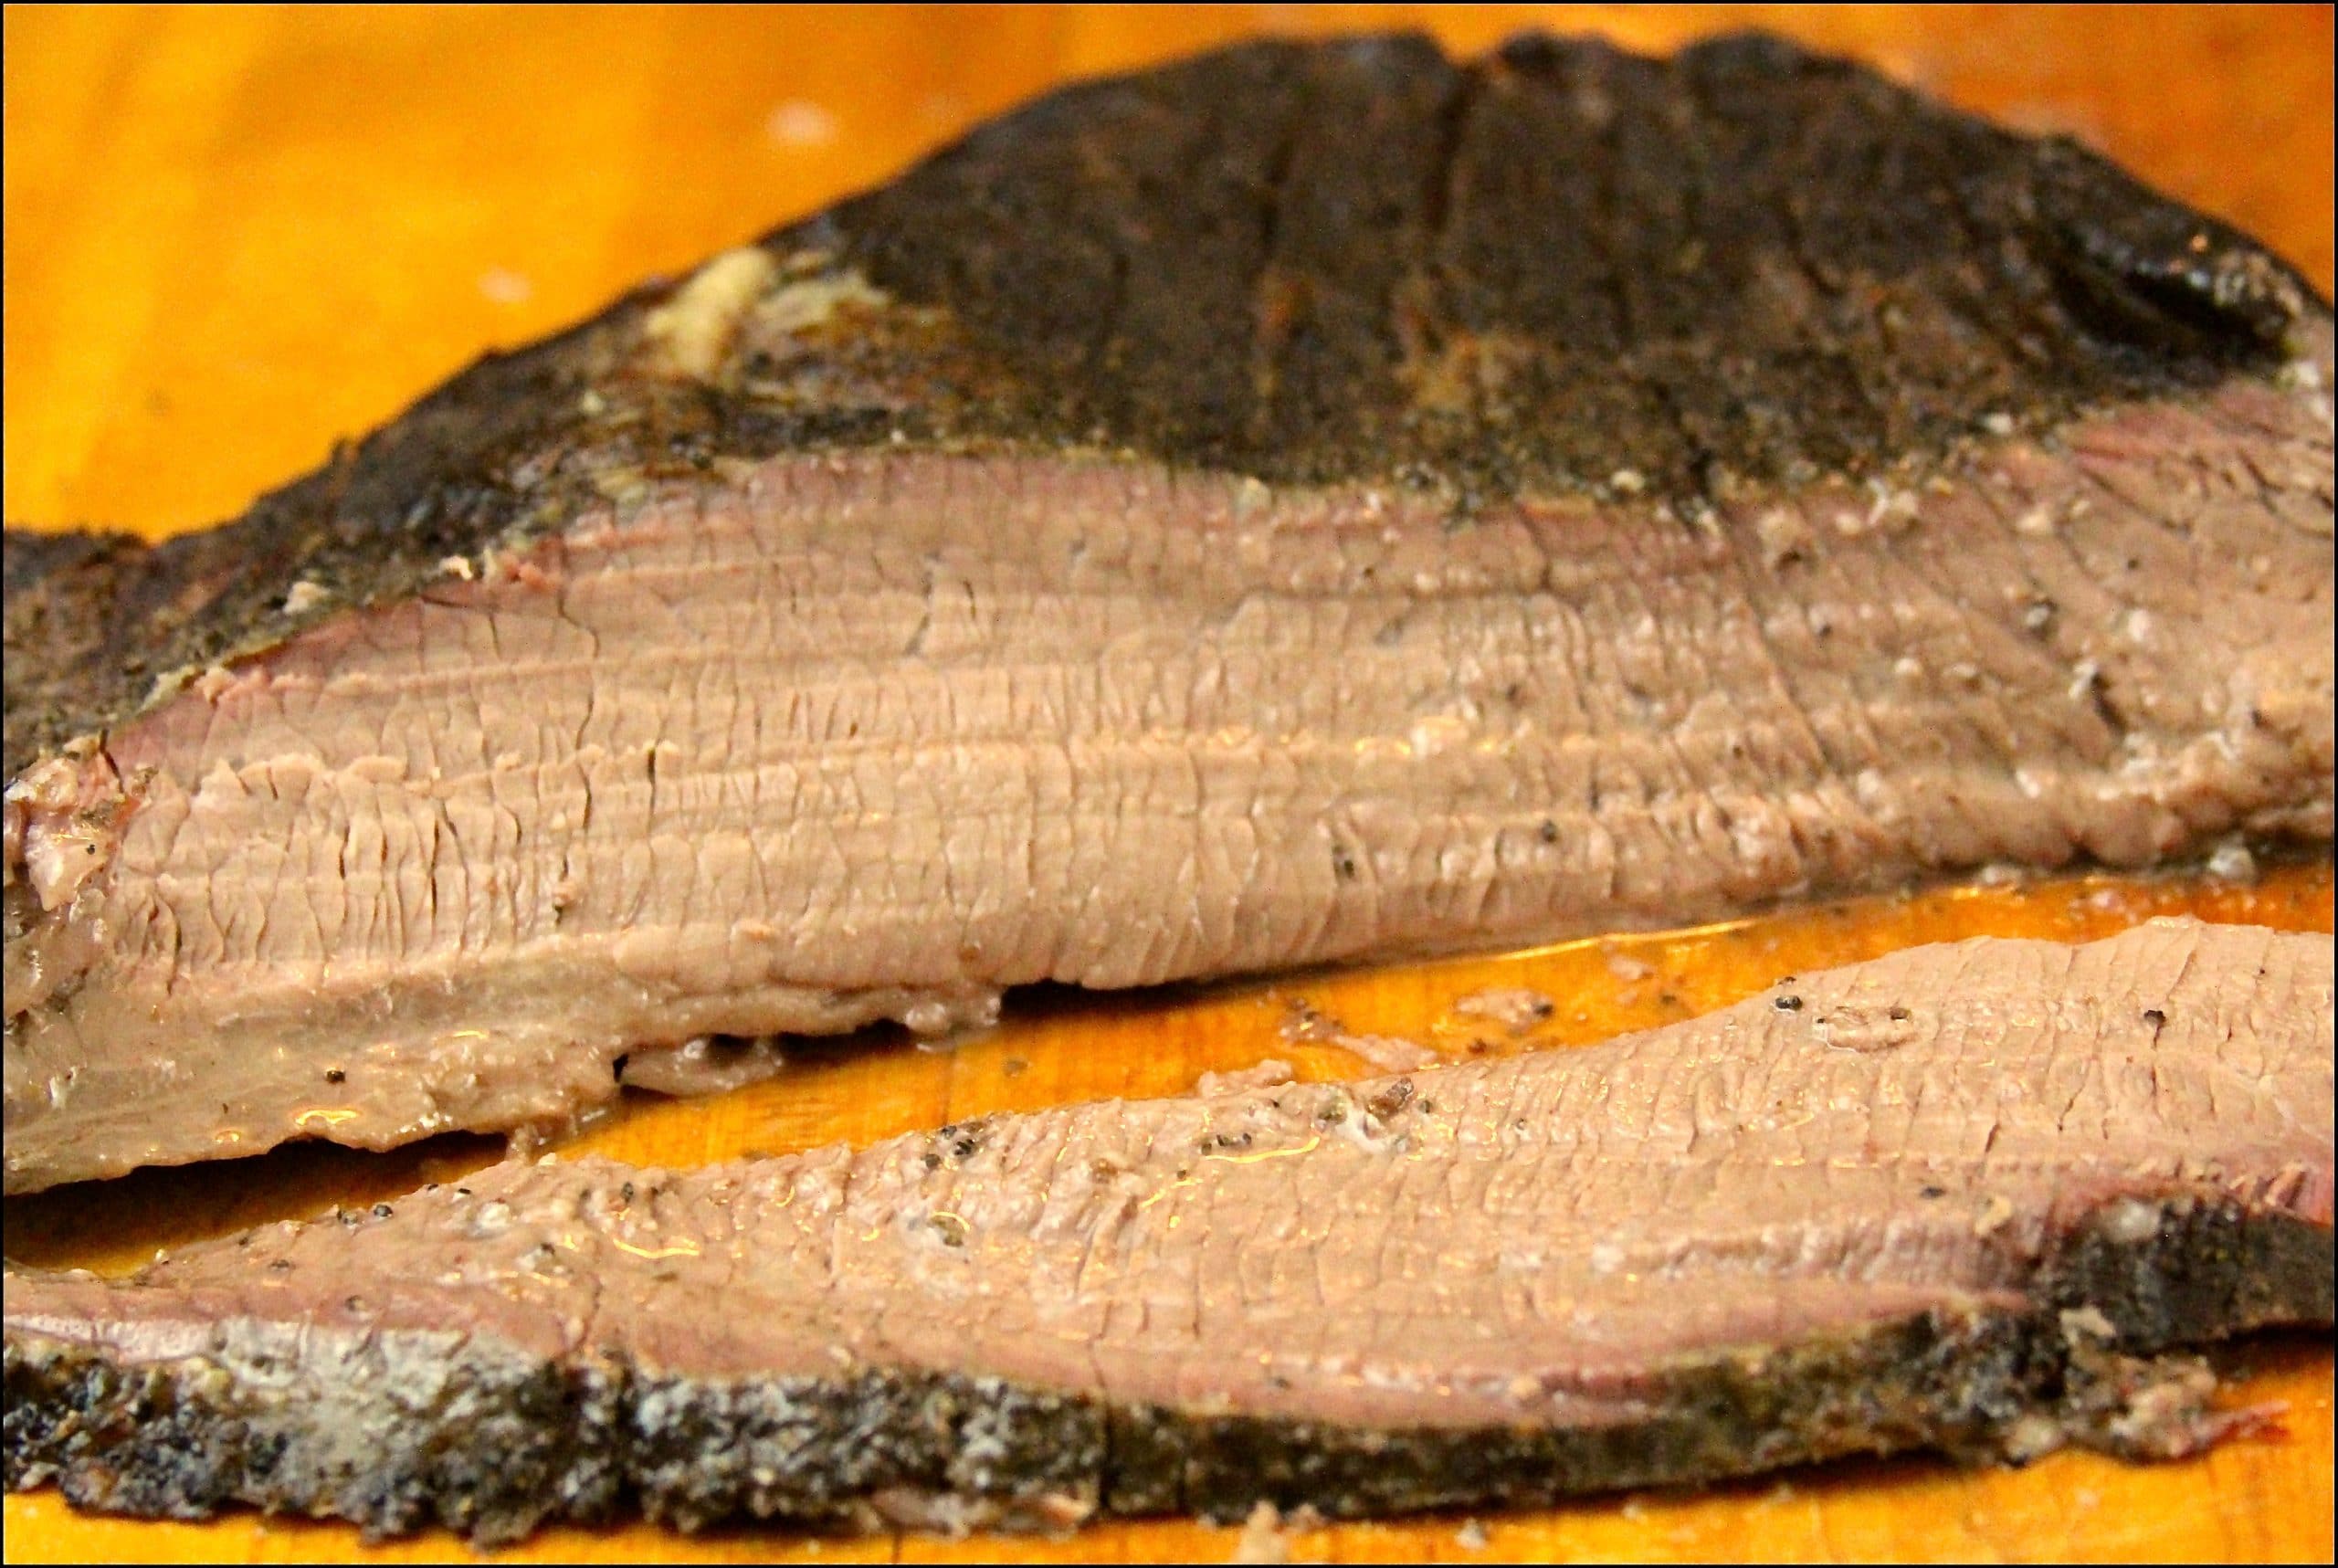 Sliced sous vide and smoked brisket